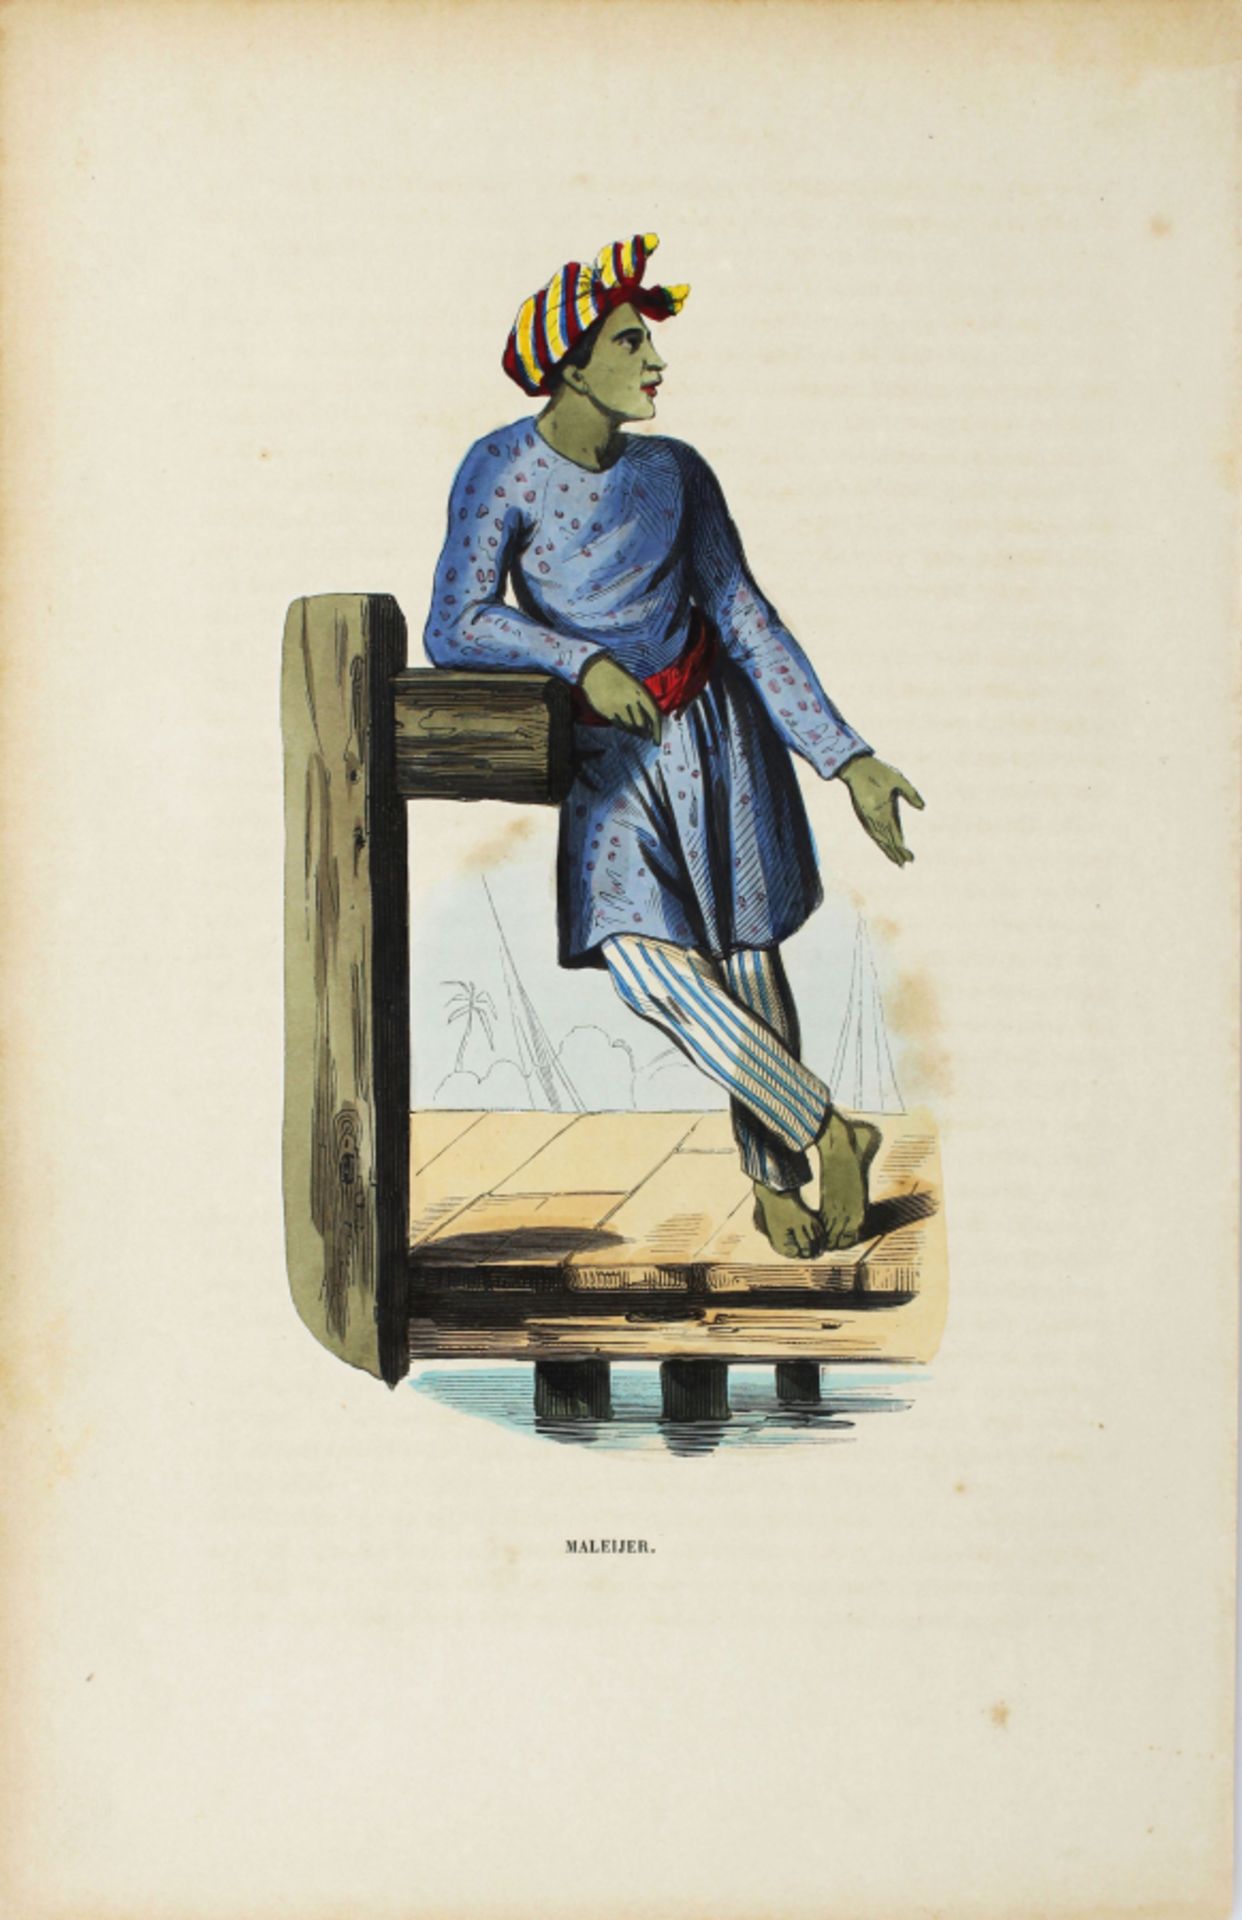 13 Ottoman, Persian, Asian, lithographs from 1843 AD, hand-coloured - Image 4 of 13